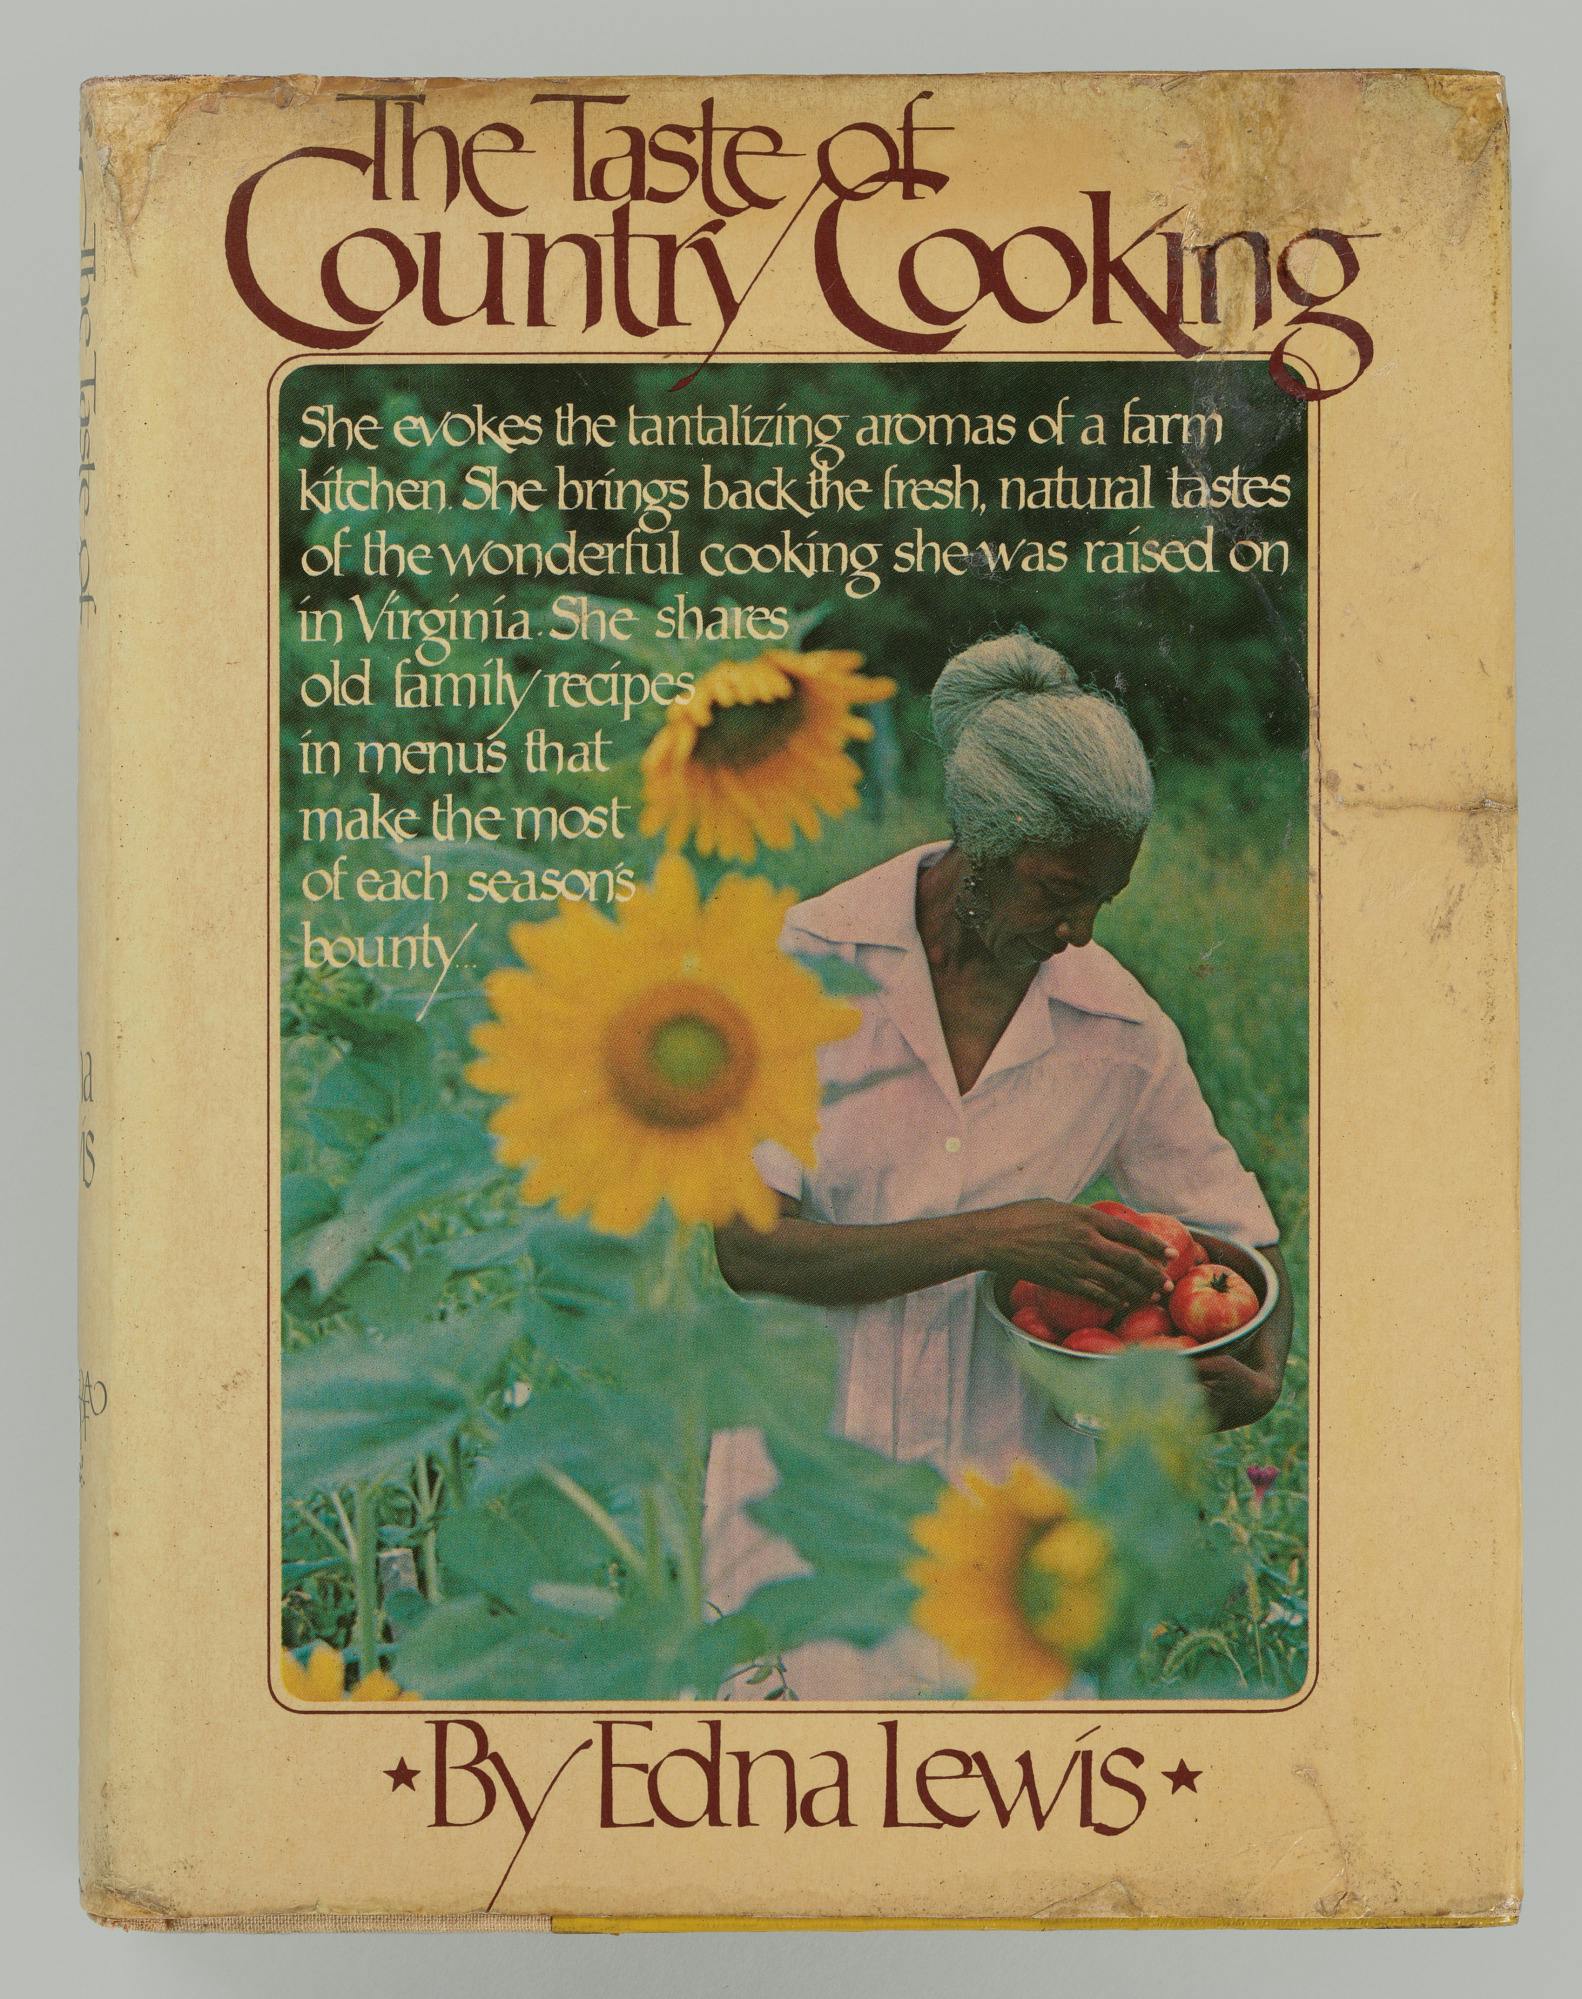 Cover of the book, The Taste of Country Cooking, by Edna Lewis. She is pictured holding a bowl of tomatoes in a field of sunflowers. Text overlays the photo: "She evokes the tantalizing aromas or a farm kitchen. She brings back the fresh, natural tastes of the wonderful cooking she was raised on in Virgnia. She shares old family recipes in menus that make the most of each season's bounty."